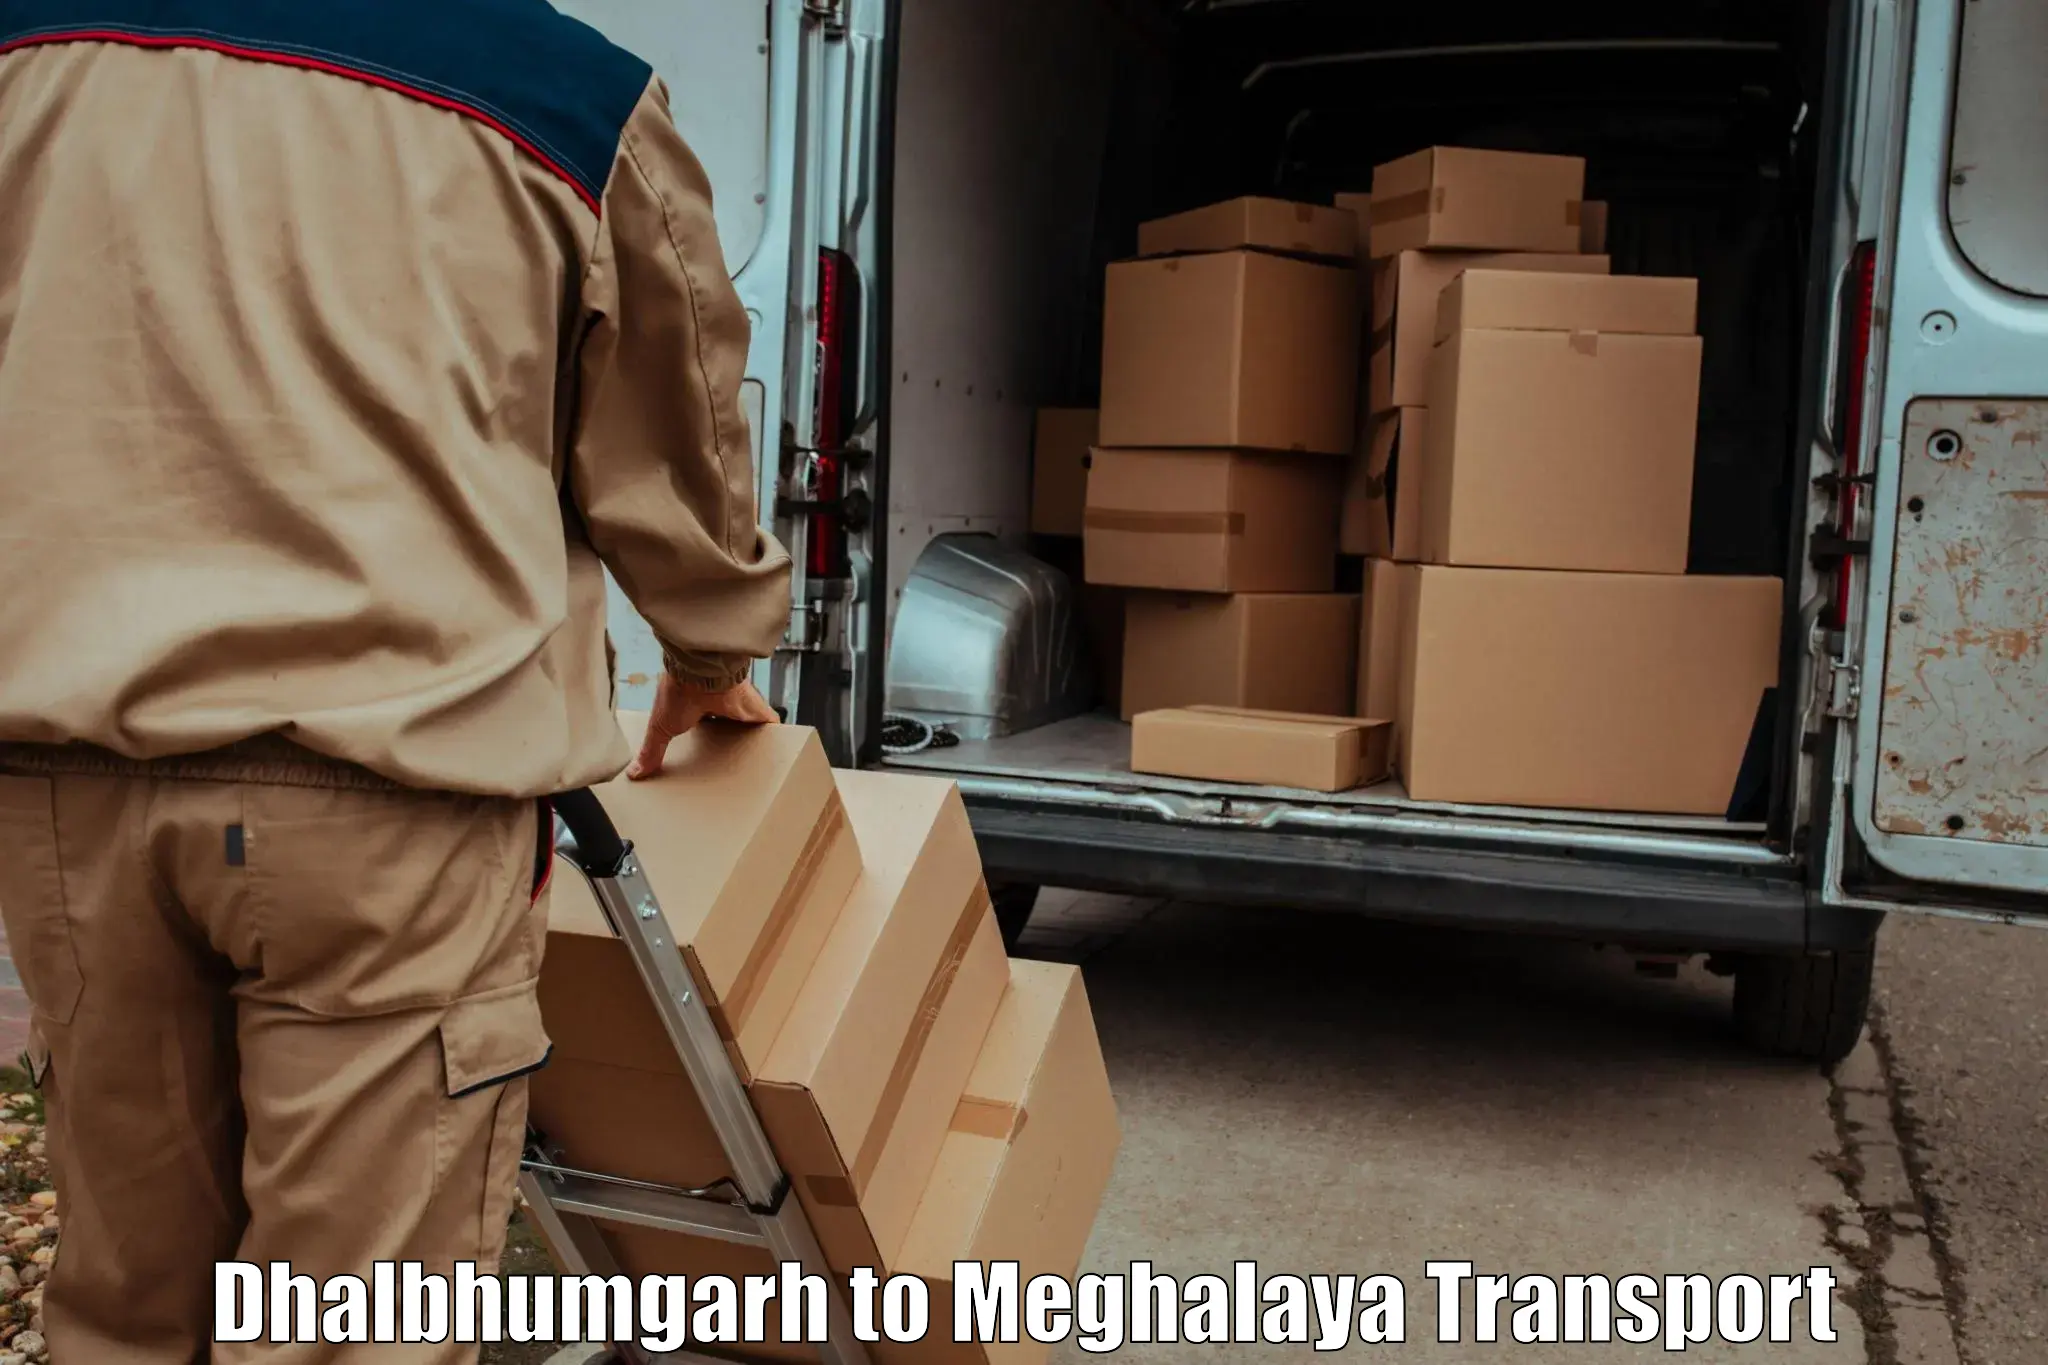 Express transport services Dhalbhumgarh to Dkhiah West